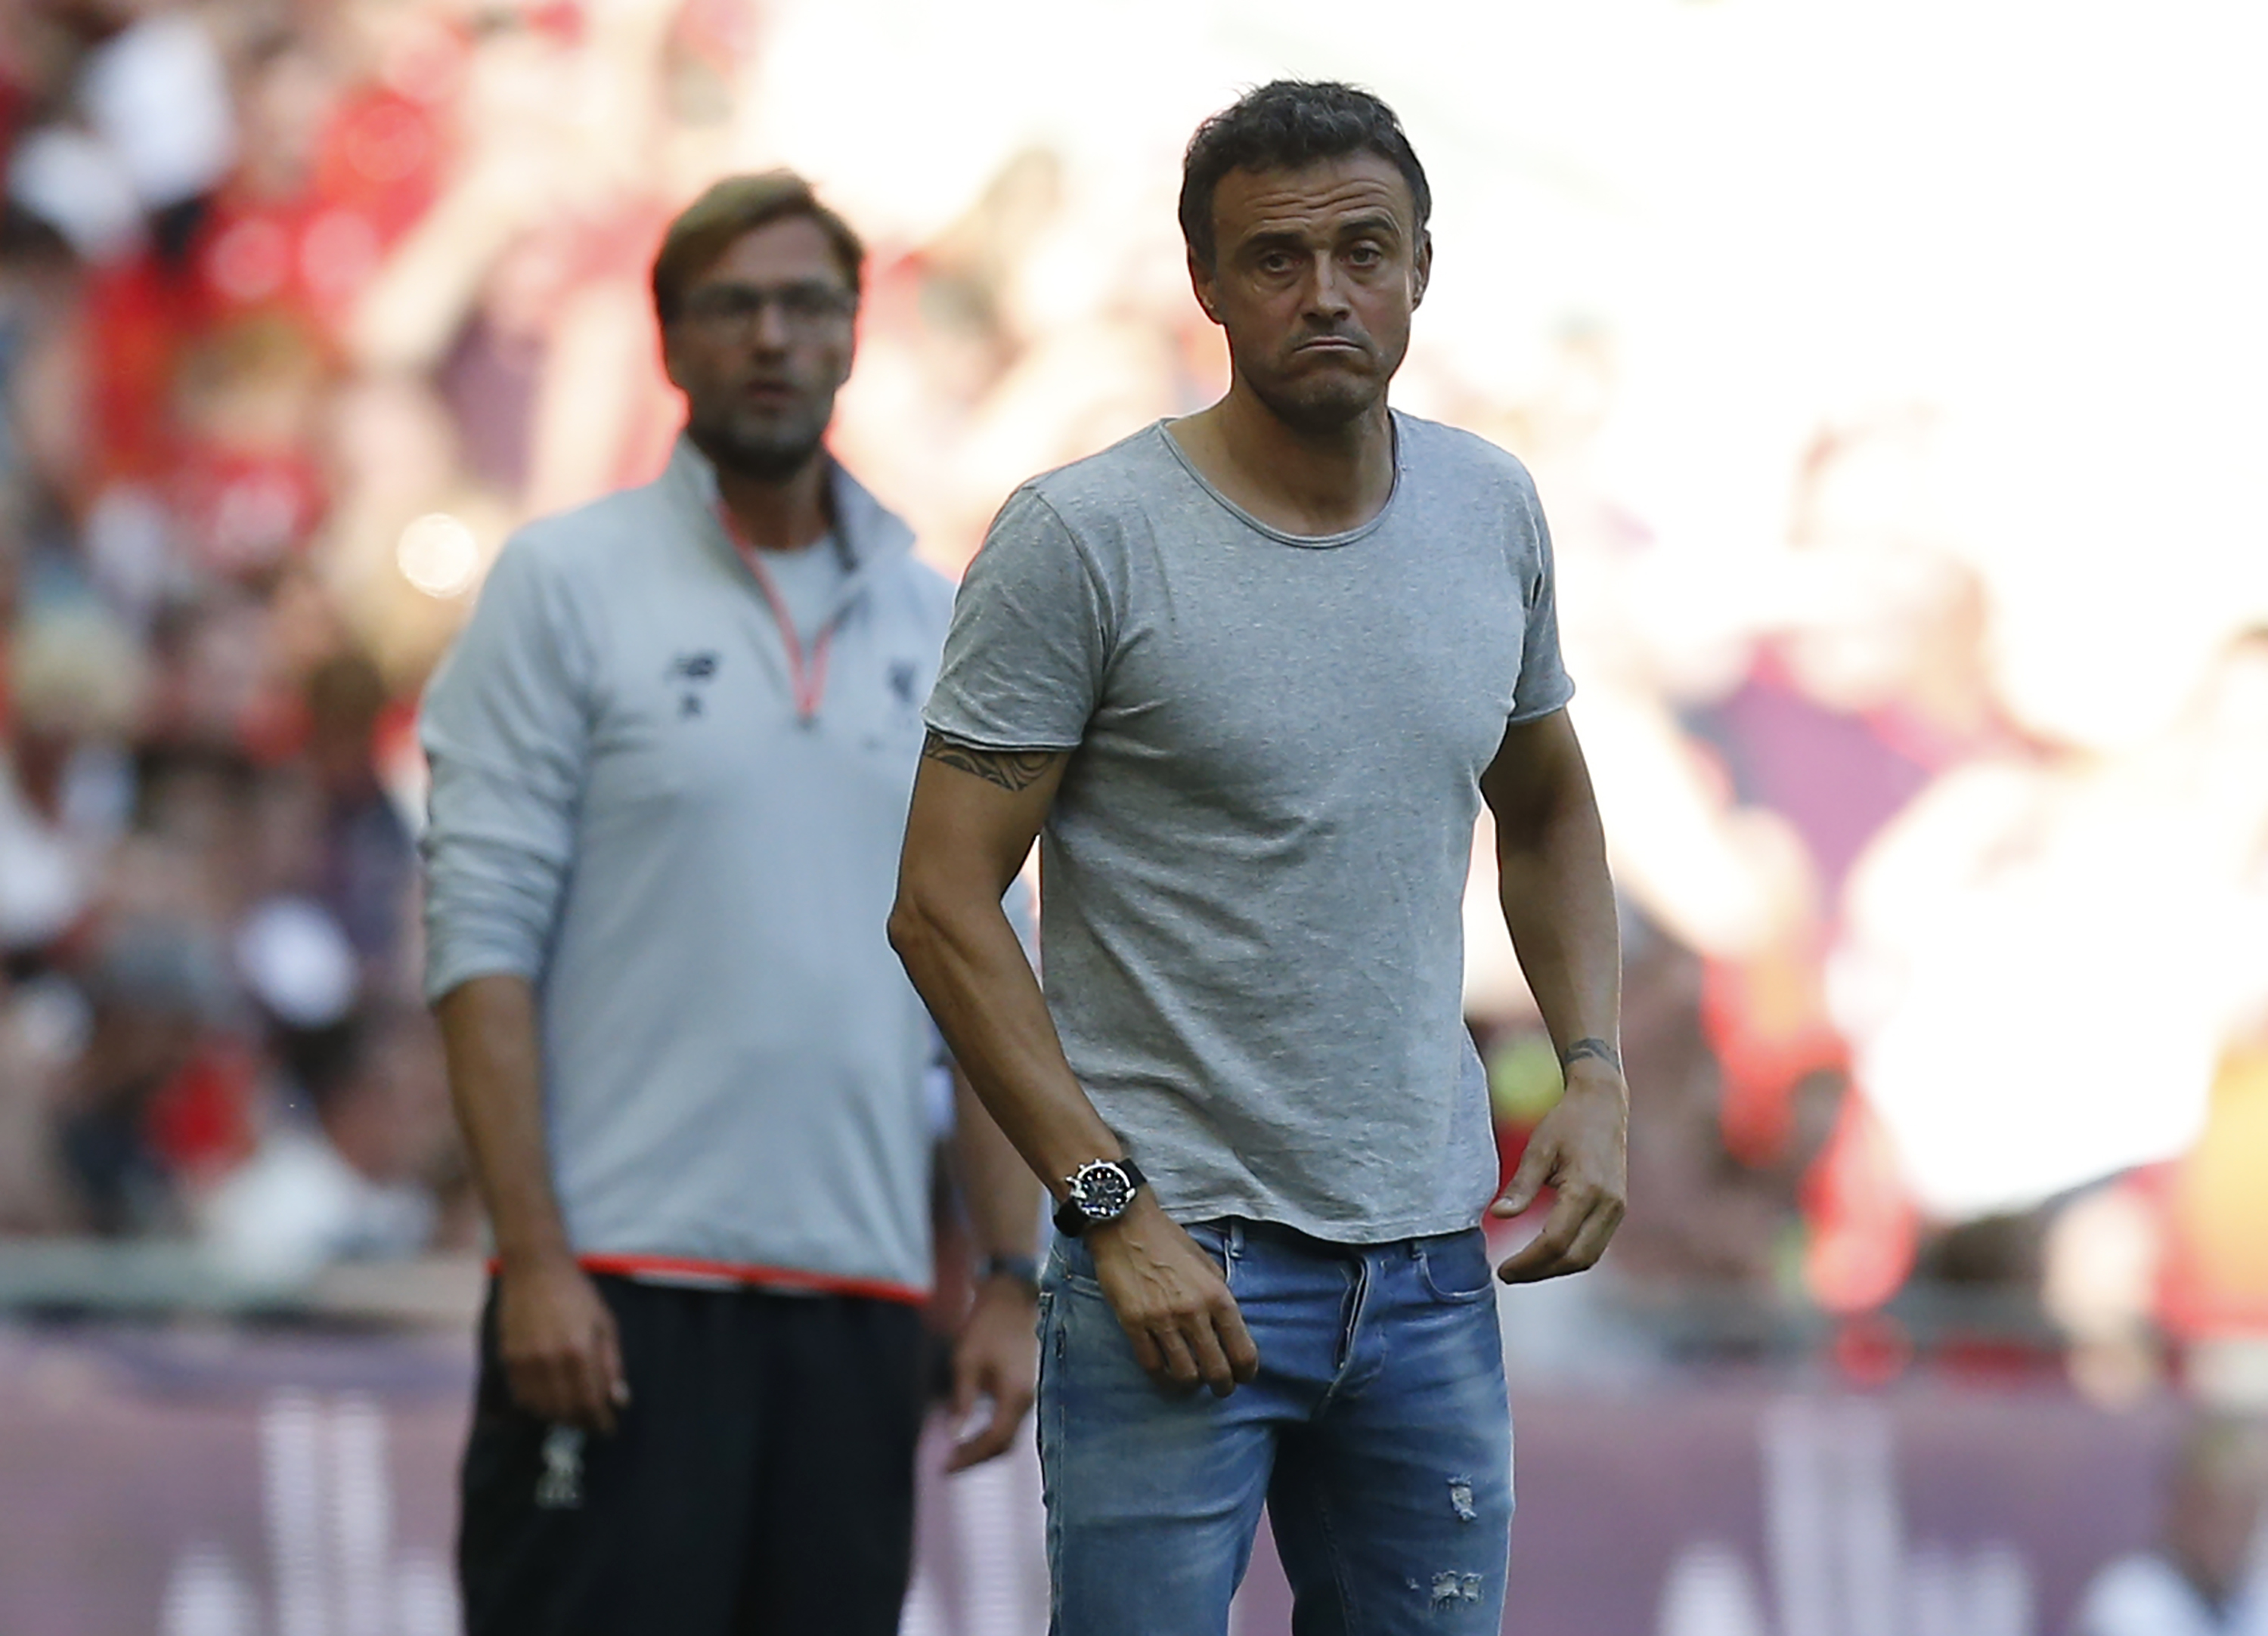 Barcelona's coach Luis Enrique (R) and Liverpool's German manager Jurgen Klopp watch from the touchline during the pre-season International Champions Cup football match between Spanish champions, Barcelona and Liverpool at Wembley stadium in London on August 6, 2016. / AFP / Ian KINGTON        (Photo credit should read IAN KINGTON/AFP/Getty Images)